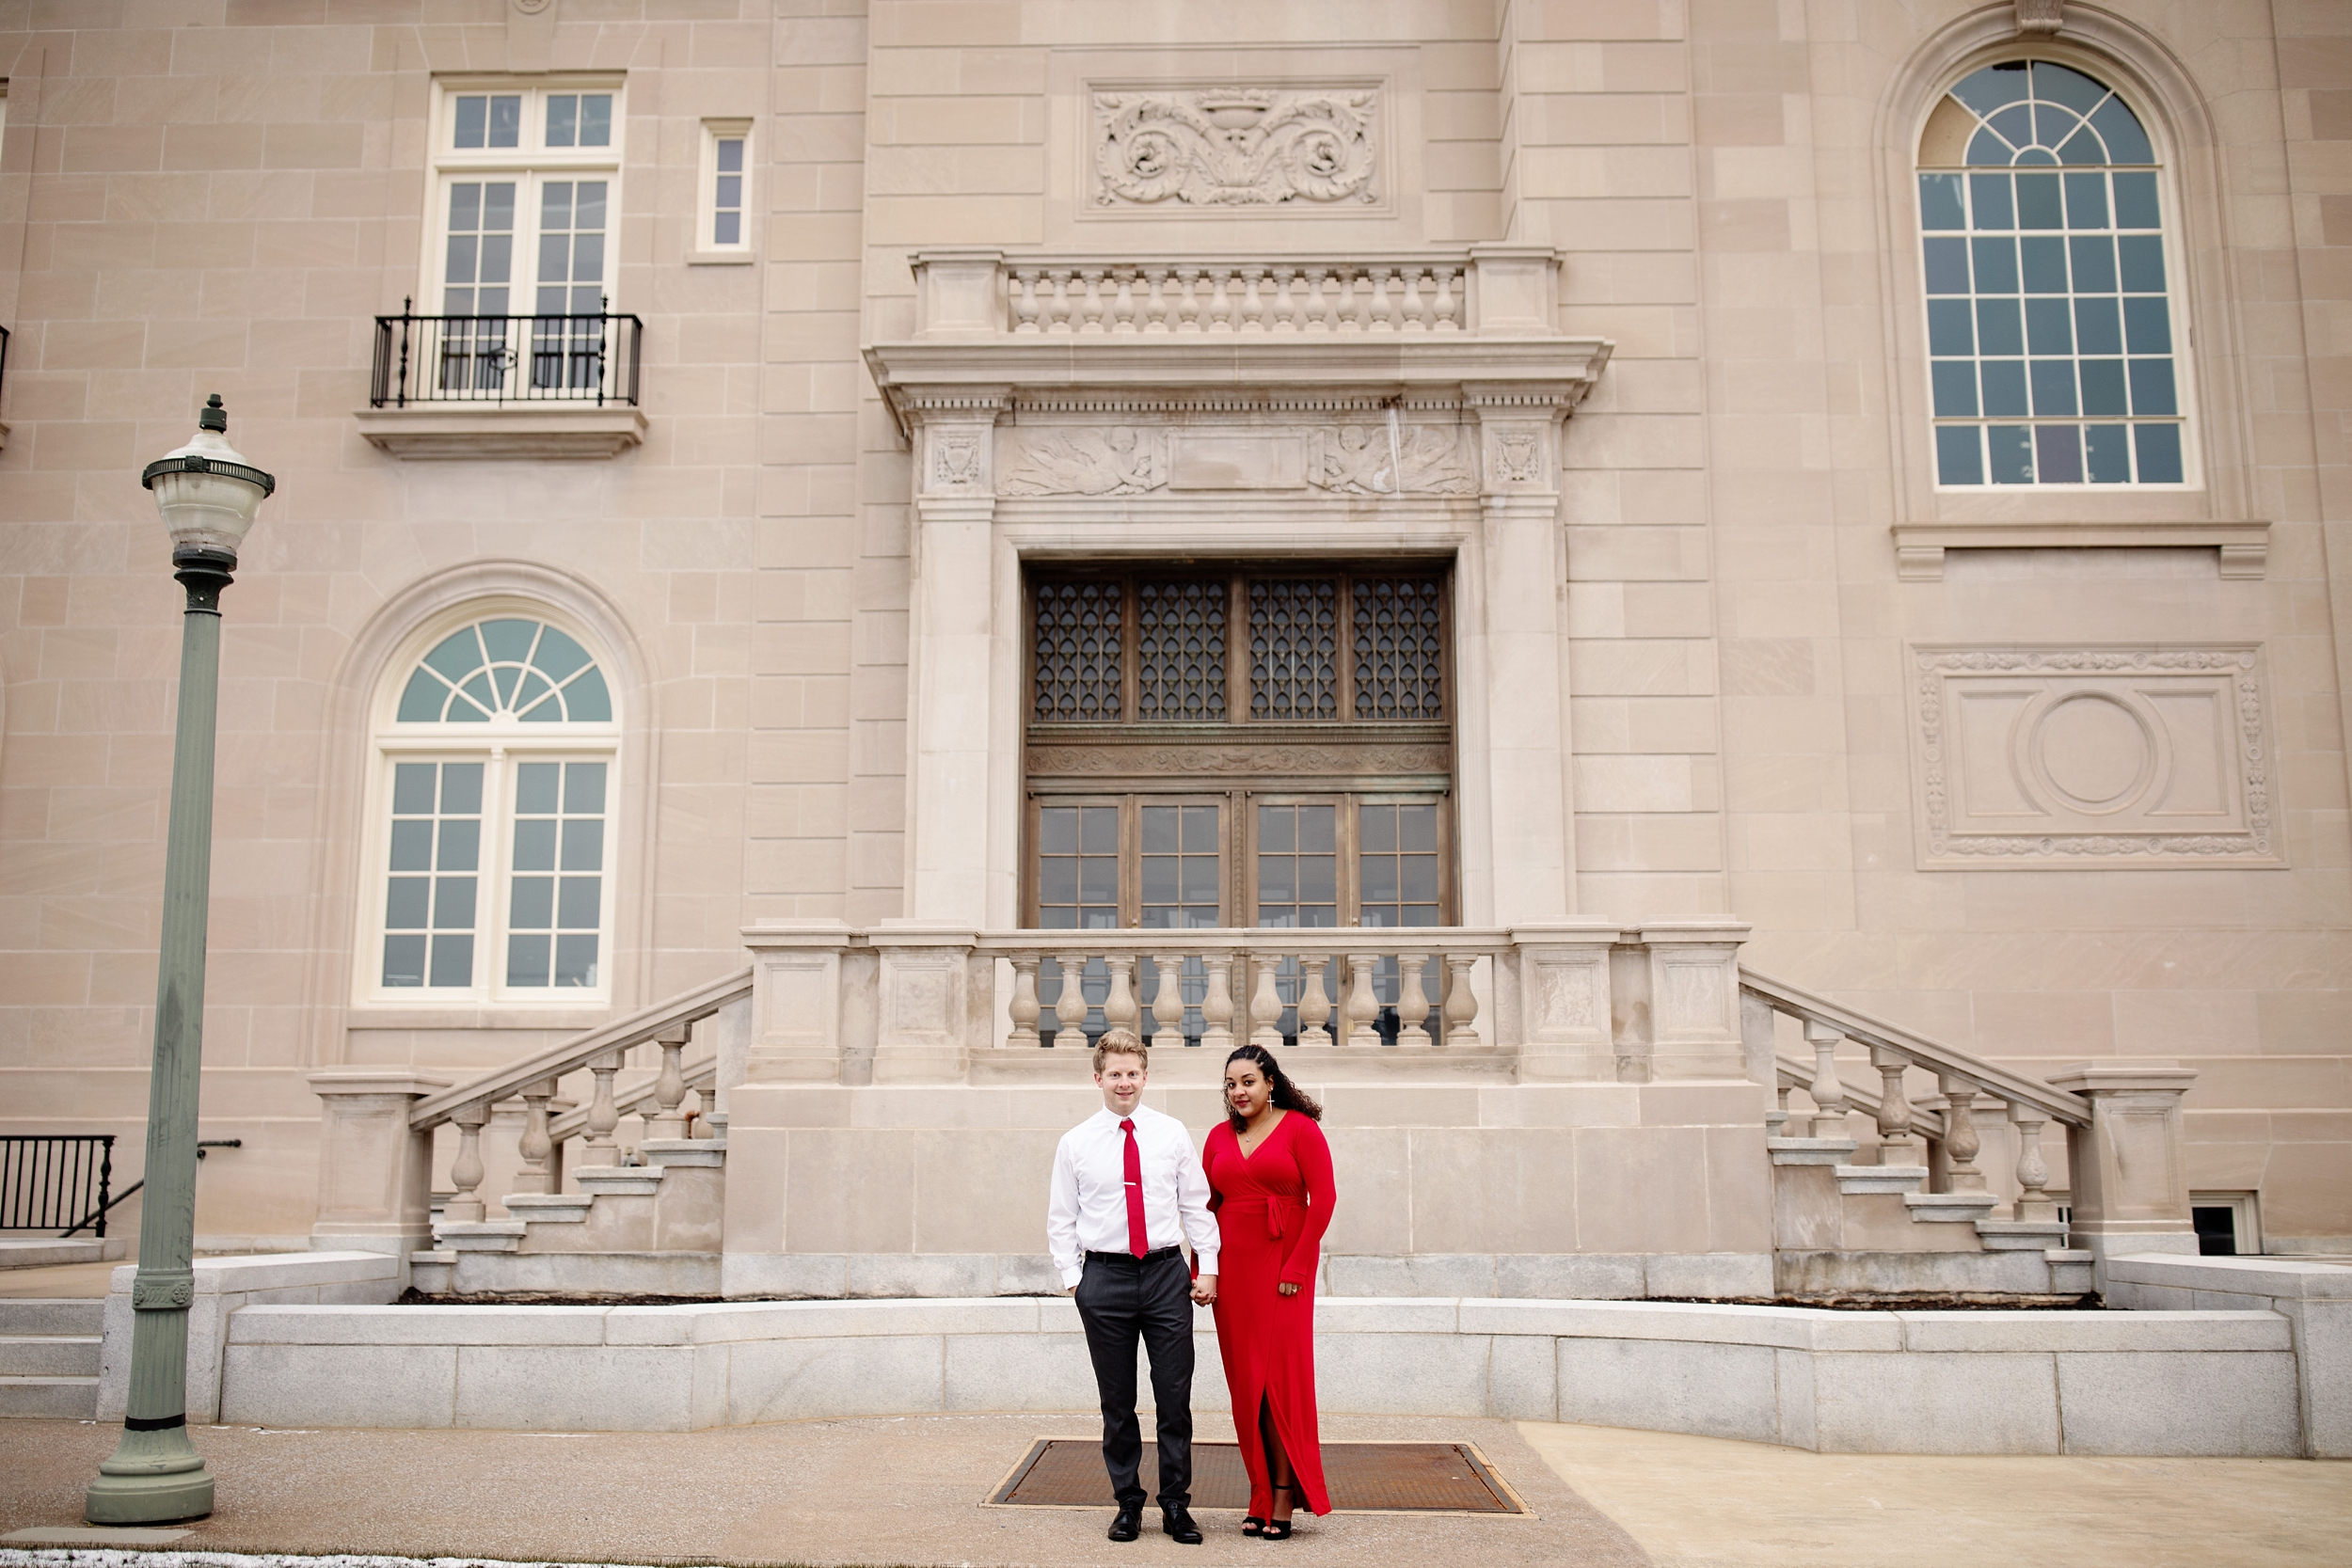 Hershey PA Theatre Romantic and Bold Engagement Photo Session captured by Hershey, PA photographers Janae Rose Photography